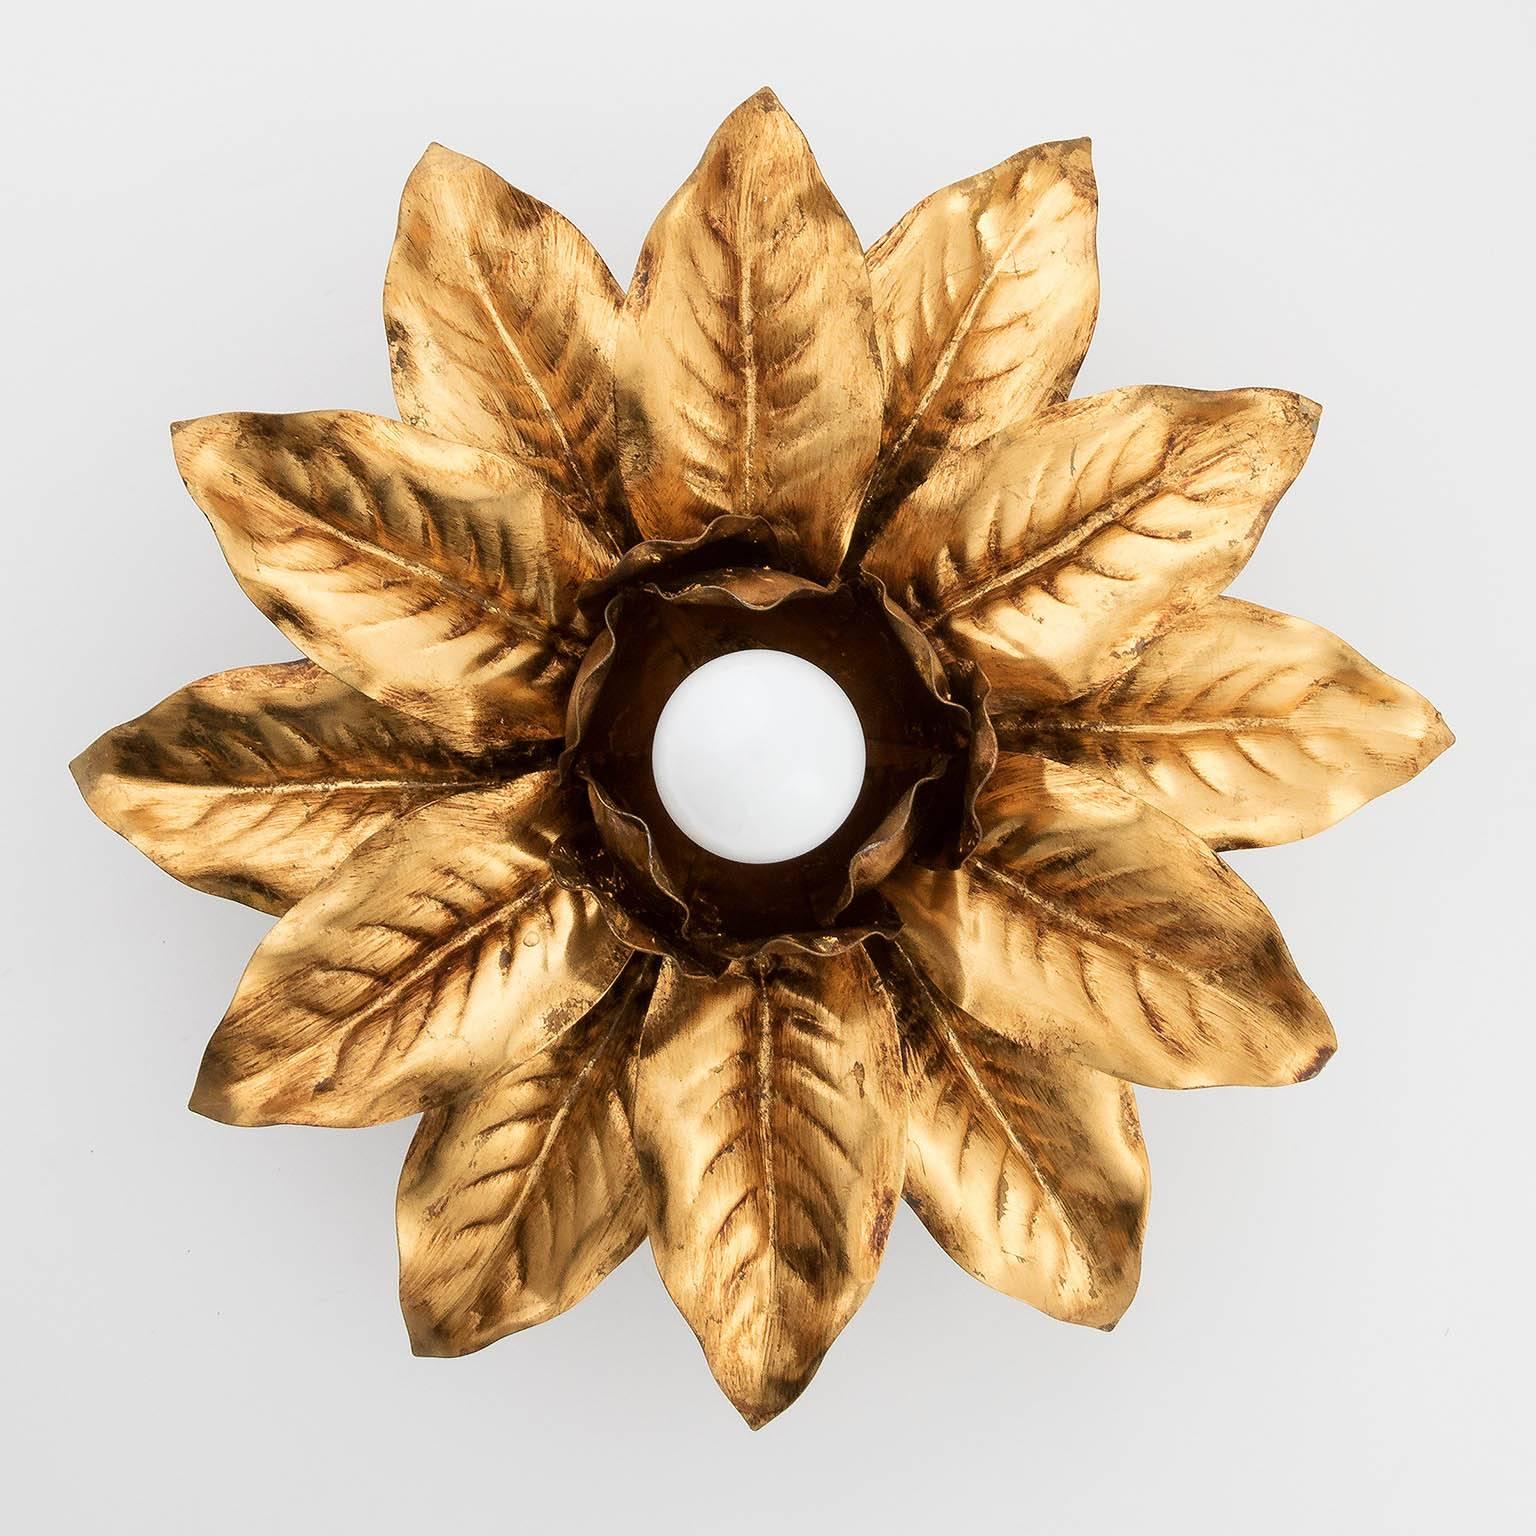 A pair of floral flush mount lights from Italy, manufactured in Midcentury. They are made of antique gilt or bronzed metal. A medium Edison base bulb is like a bud in the middle of centered arranged leaves.